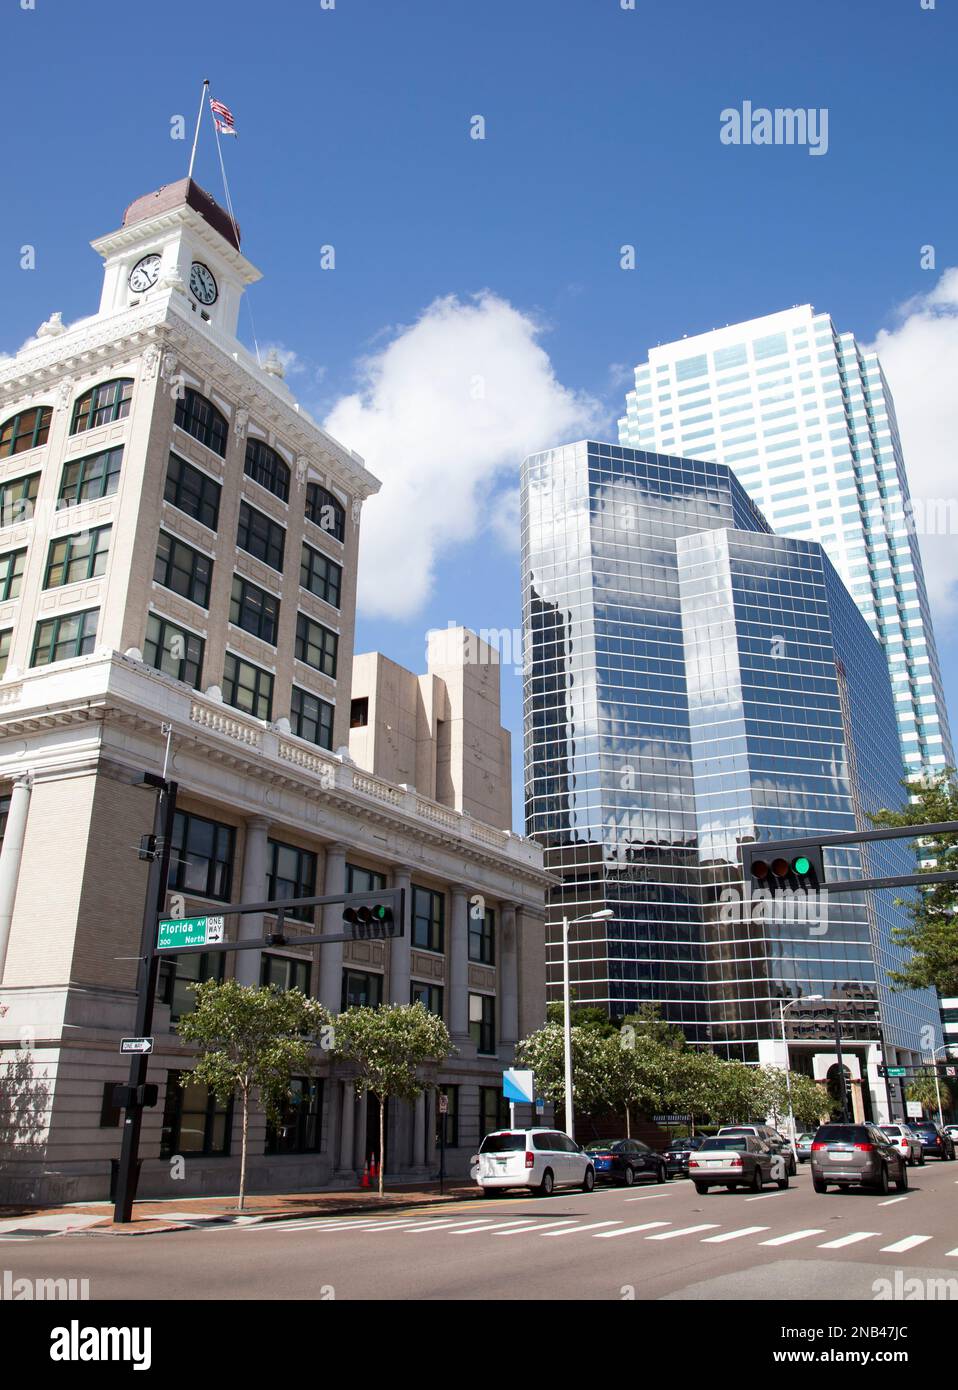 The view of historic Tampa city hall and modern glass covered skyscrapers in a background (Florida). Stock Photo